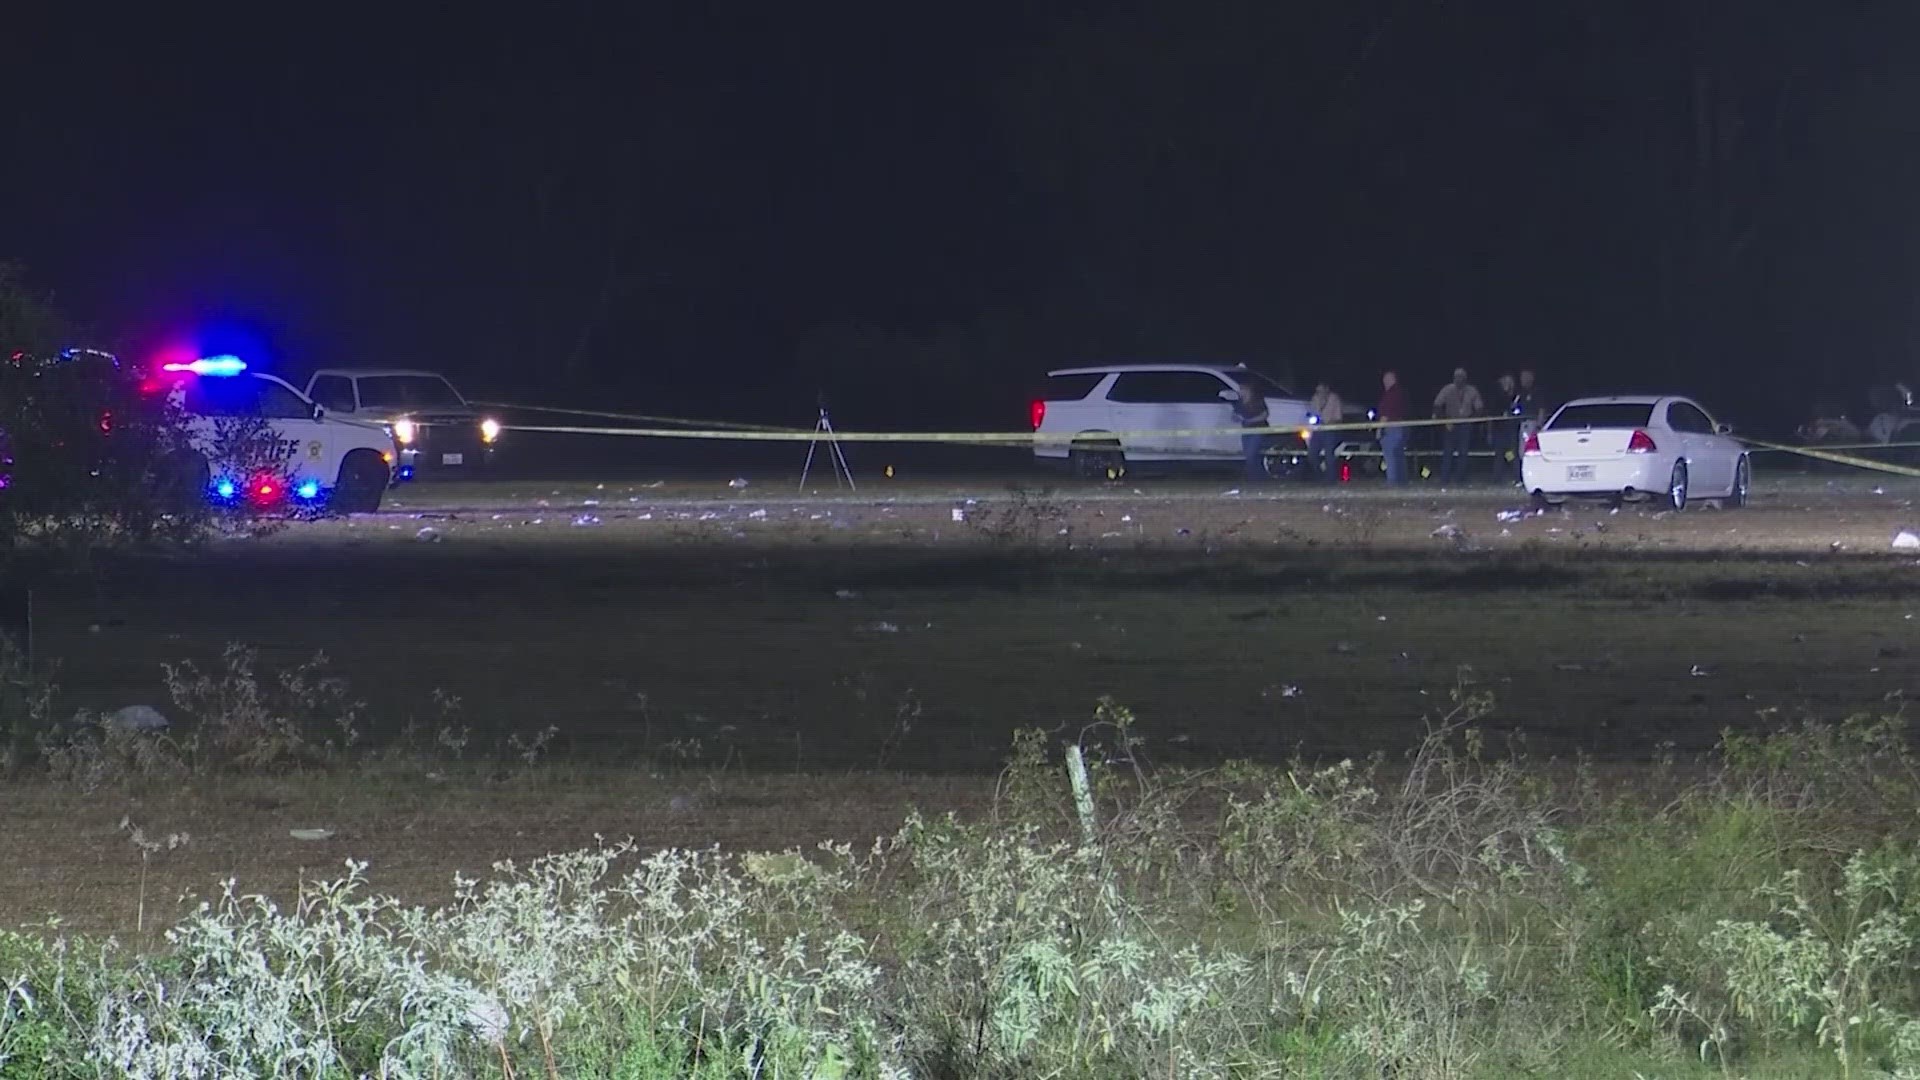 Seven people were wounded during a shooting at a trail ride pasture party held near Prairie View A&M University in Waller County Sunday night.